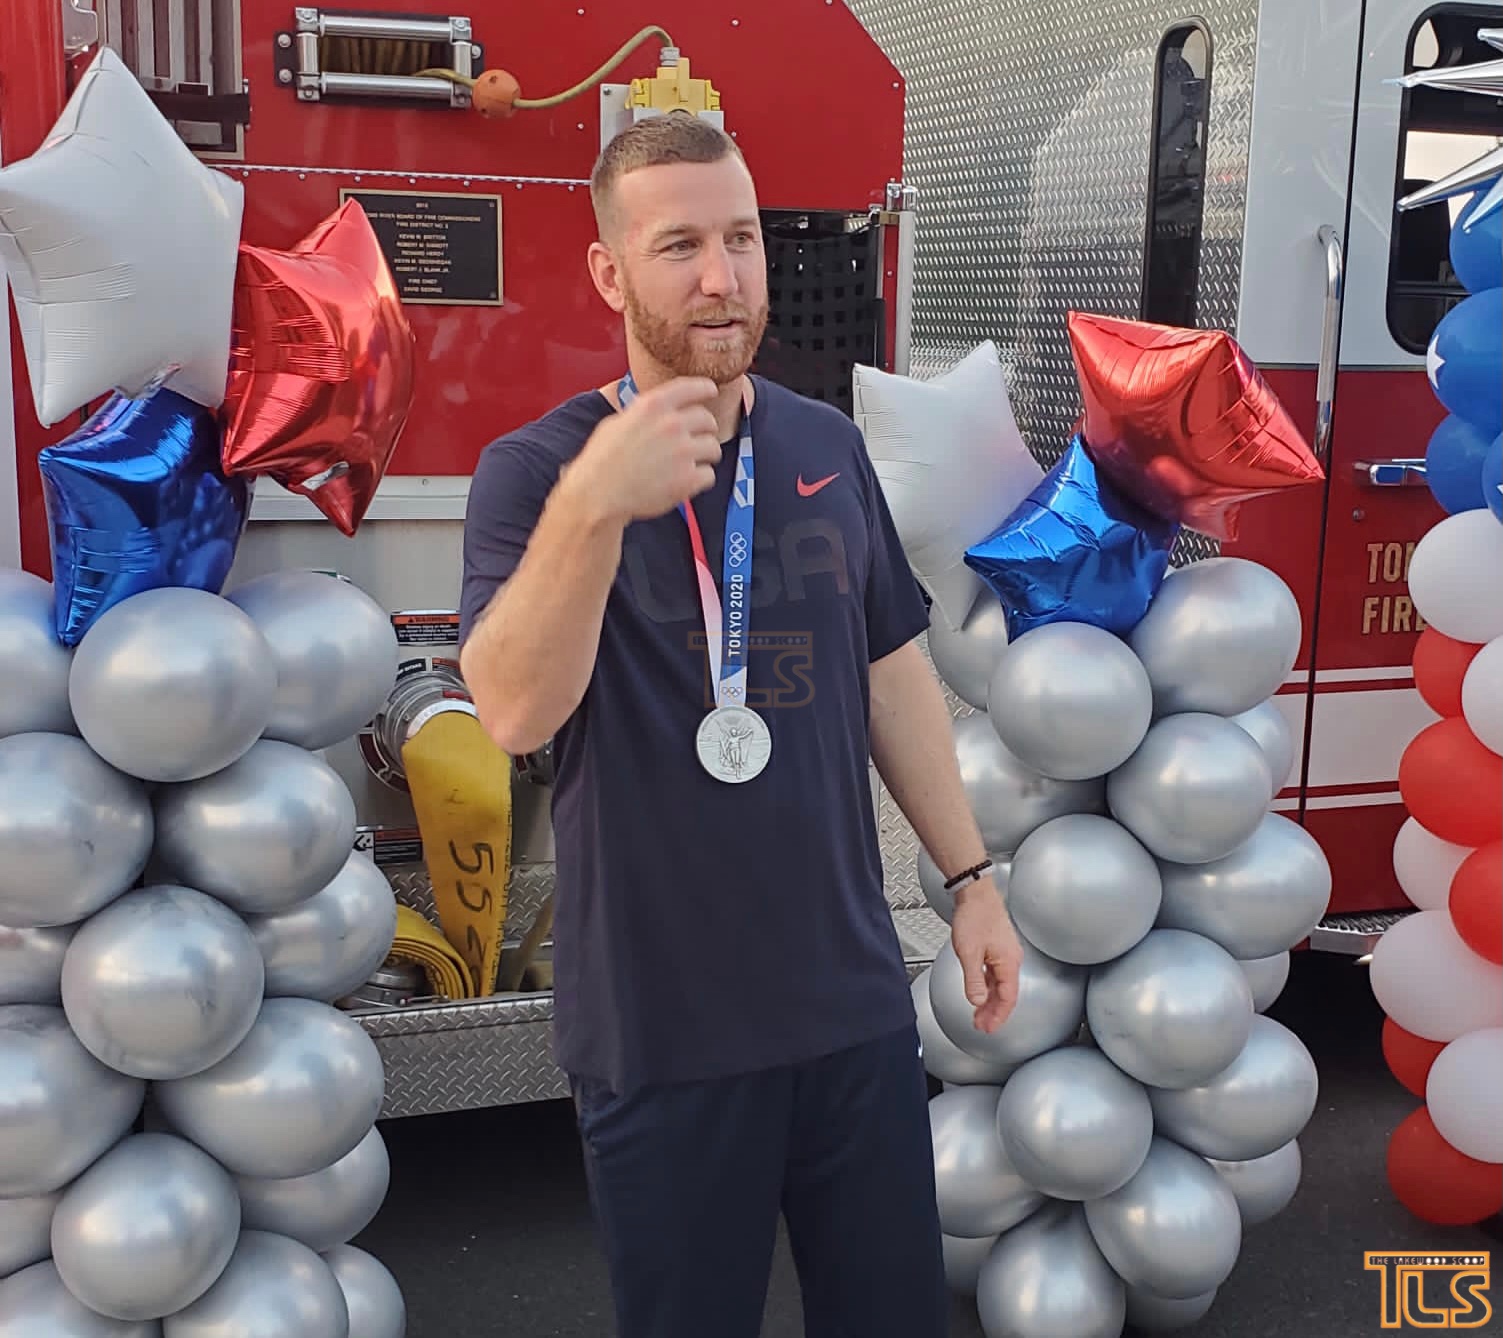 Fans Greet Toms River's Todd Frazier In Return From Olympics